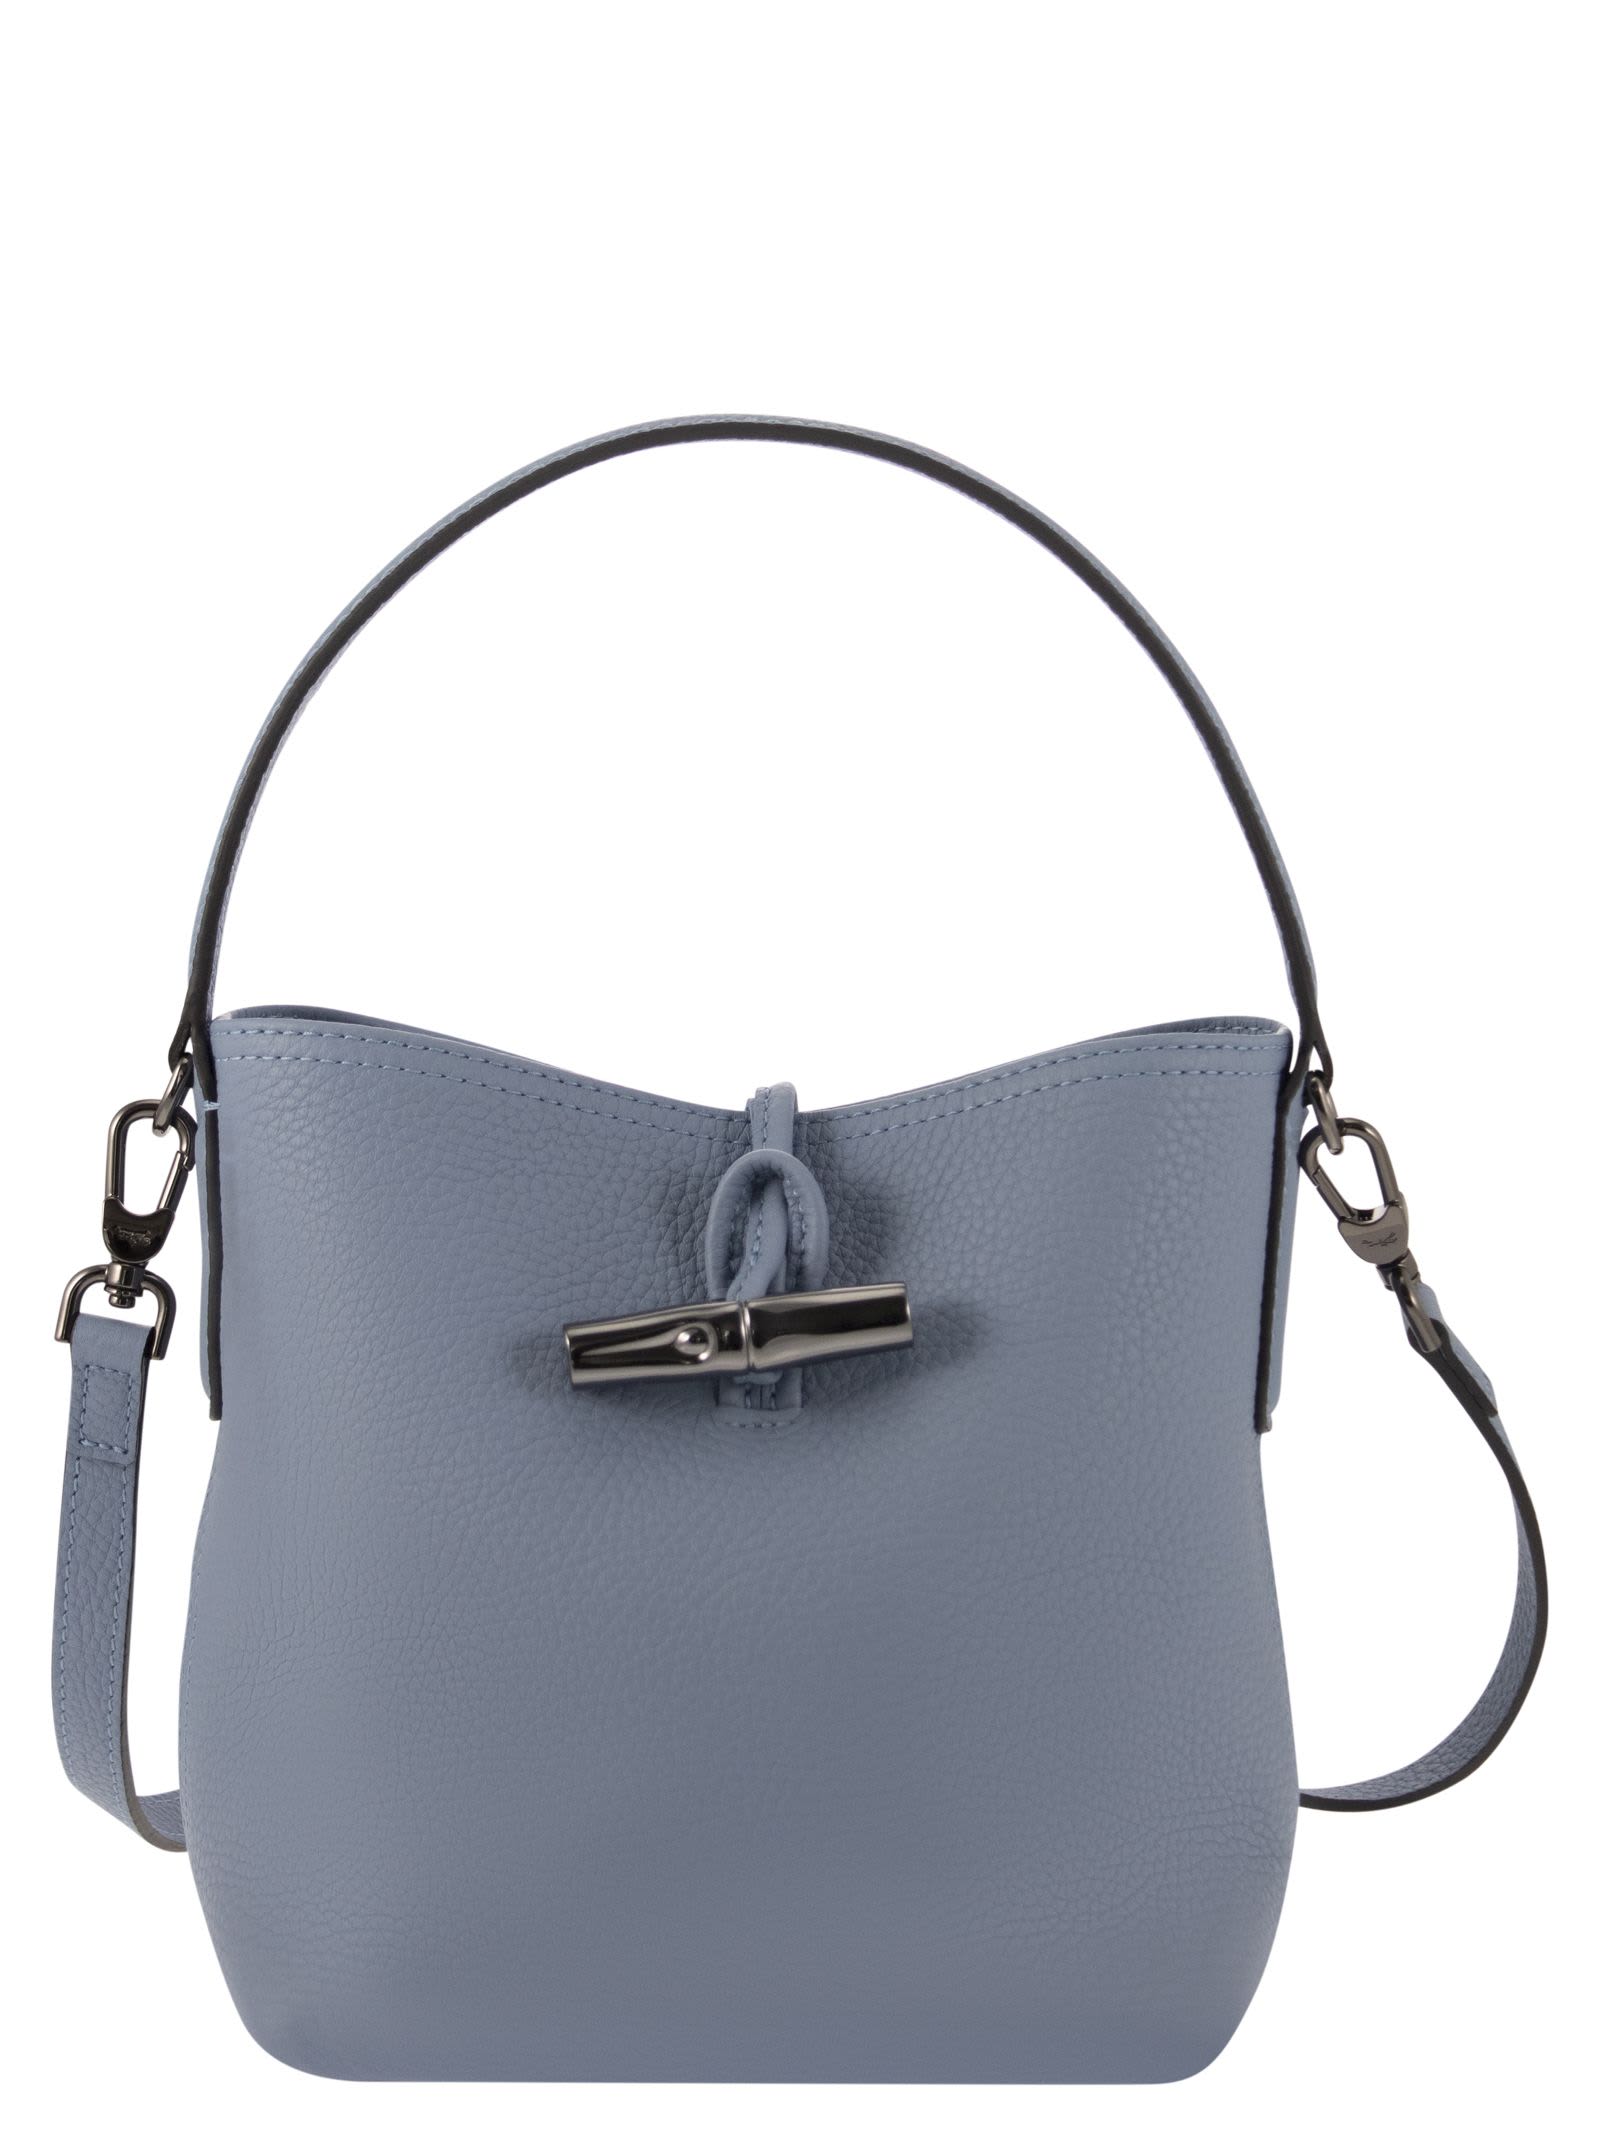 The Roseau Bucket Bag Is The Parisian Chic Accessory You Need